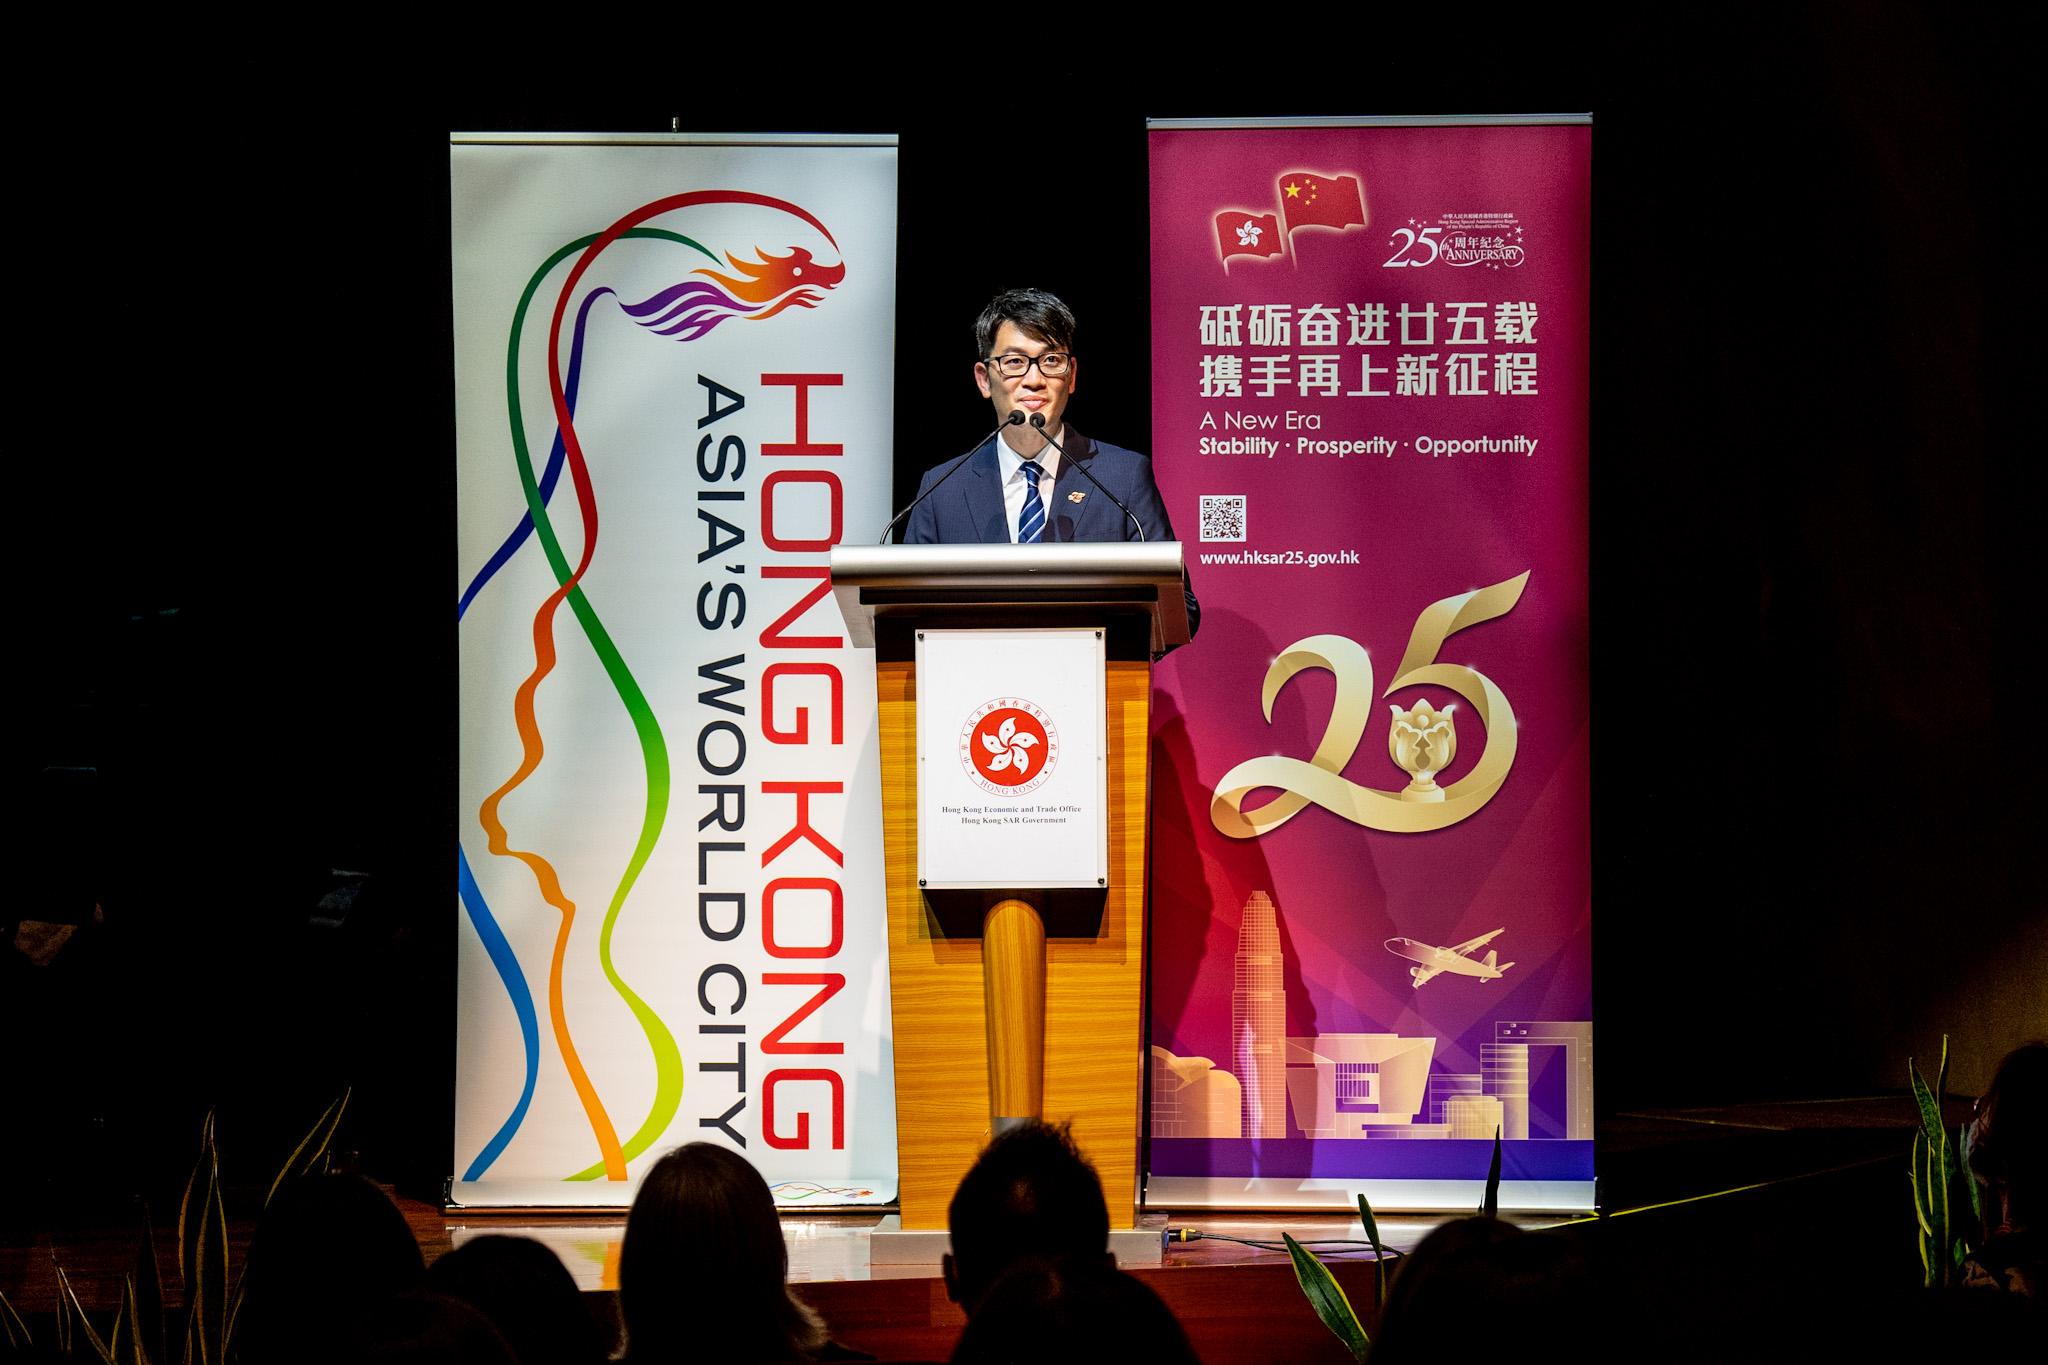 In celebration of the 25th anniversary of the establishment of the Hong Kong Special Administrative Region, the Hong Kong Economic and Trade Office in Singapore (Singapore ETO) presented the "Twin Cities Melodies" Chinese orchestra concert today (June 24). Photo shows the Director of the Singapore ETO, Mr Wong Chun To, giving an address at the concert.